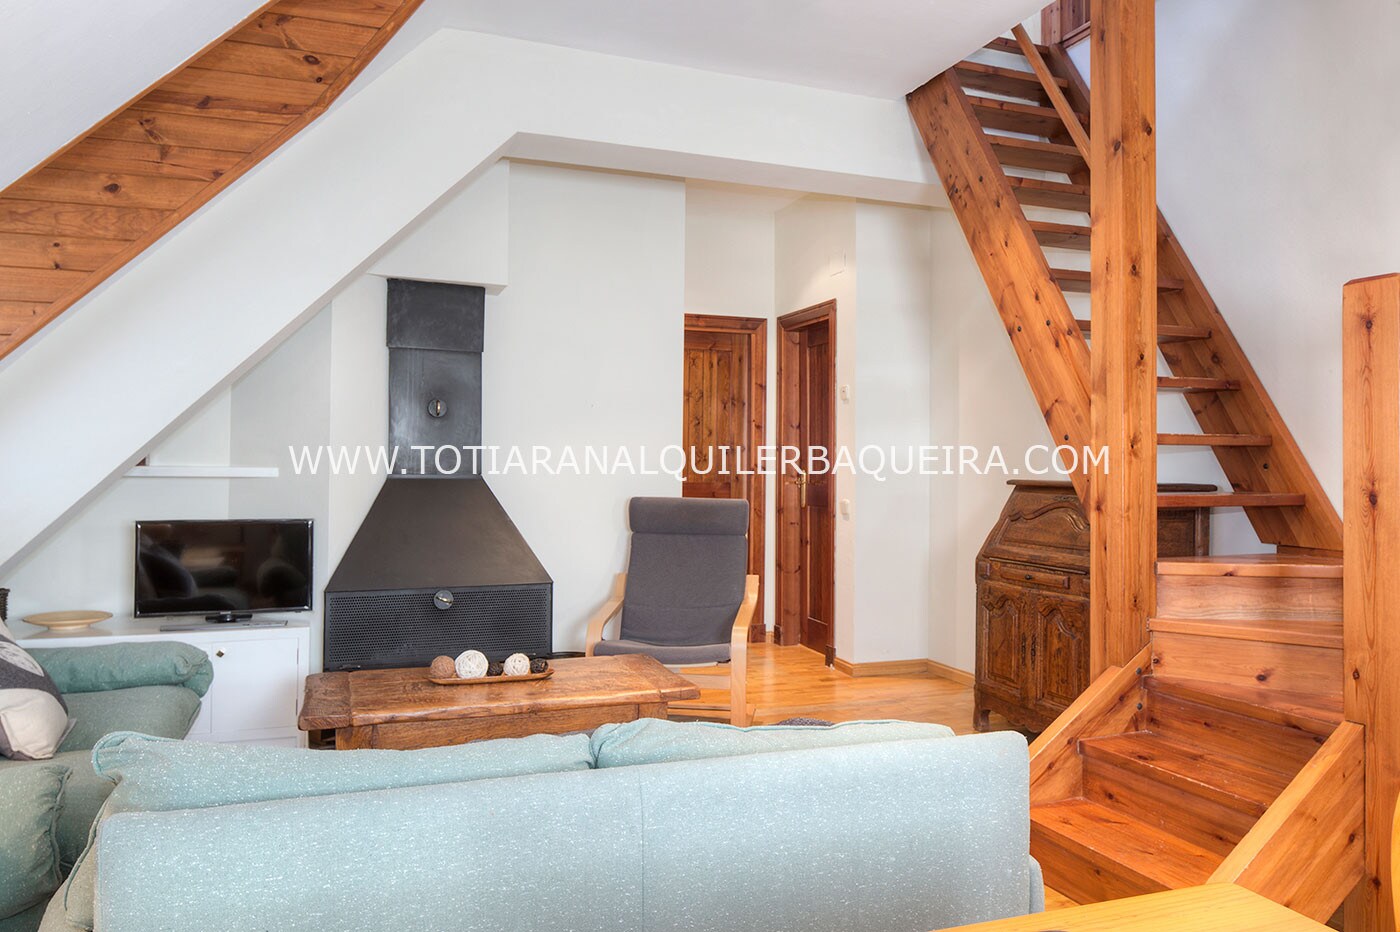 Property Image 2 - Toran Apartment 2 bedrooms 6 people, in Tanau at Baqueira next to the chairlift of Esquiros slopes